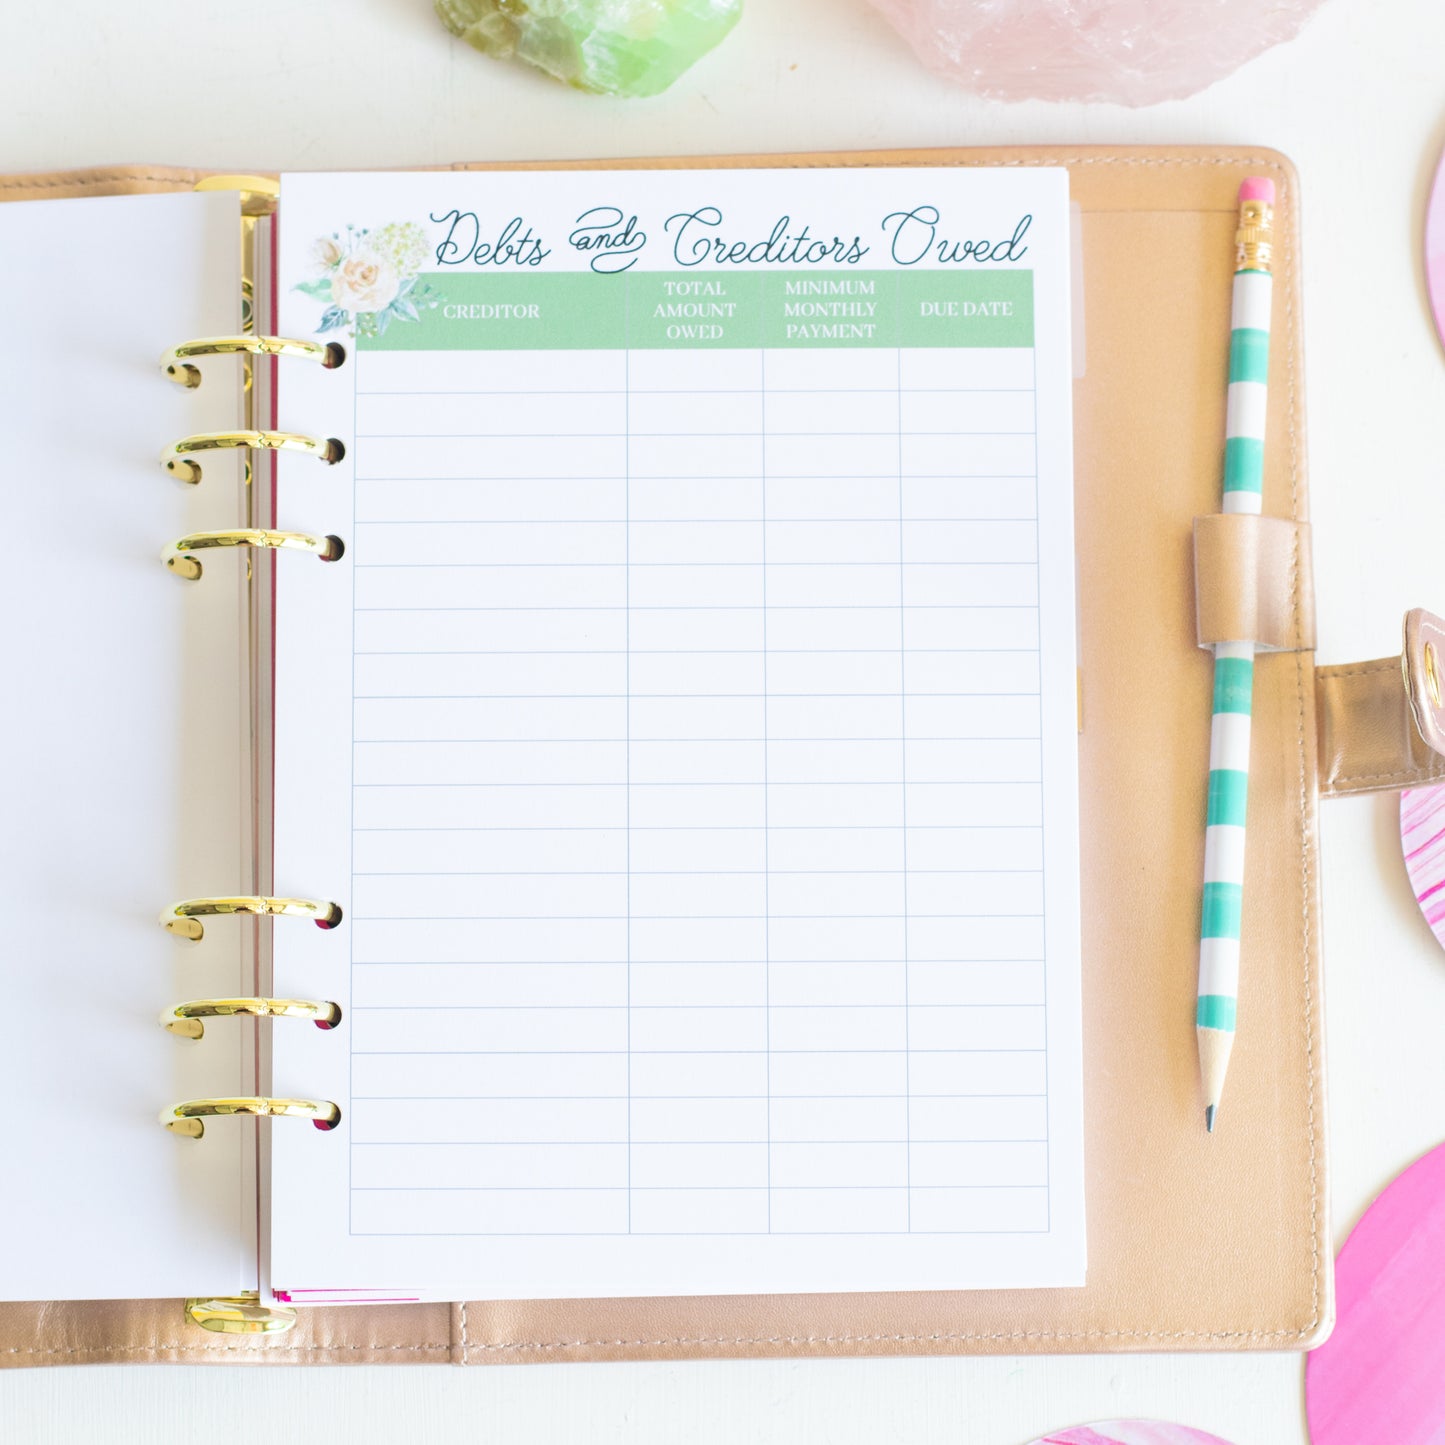 Printable A5 Spend Well Budgeting Planner Inserts {Floral Geo}